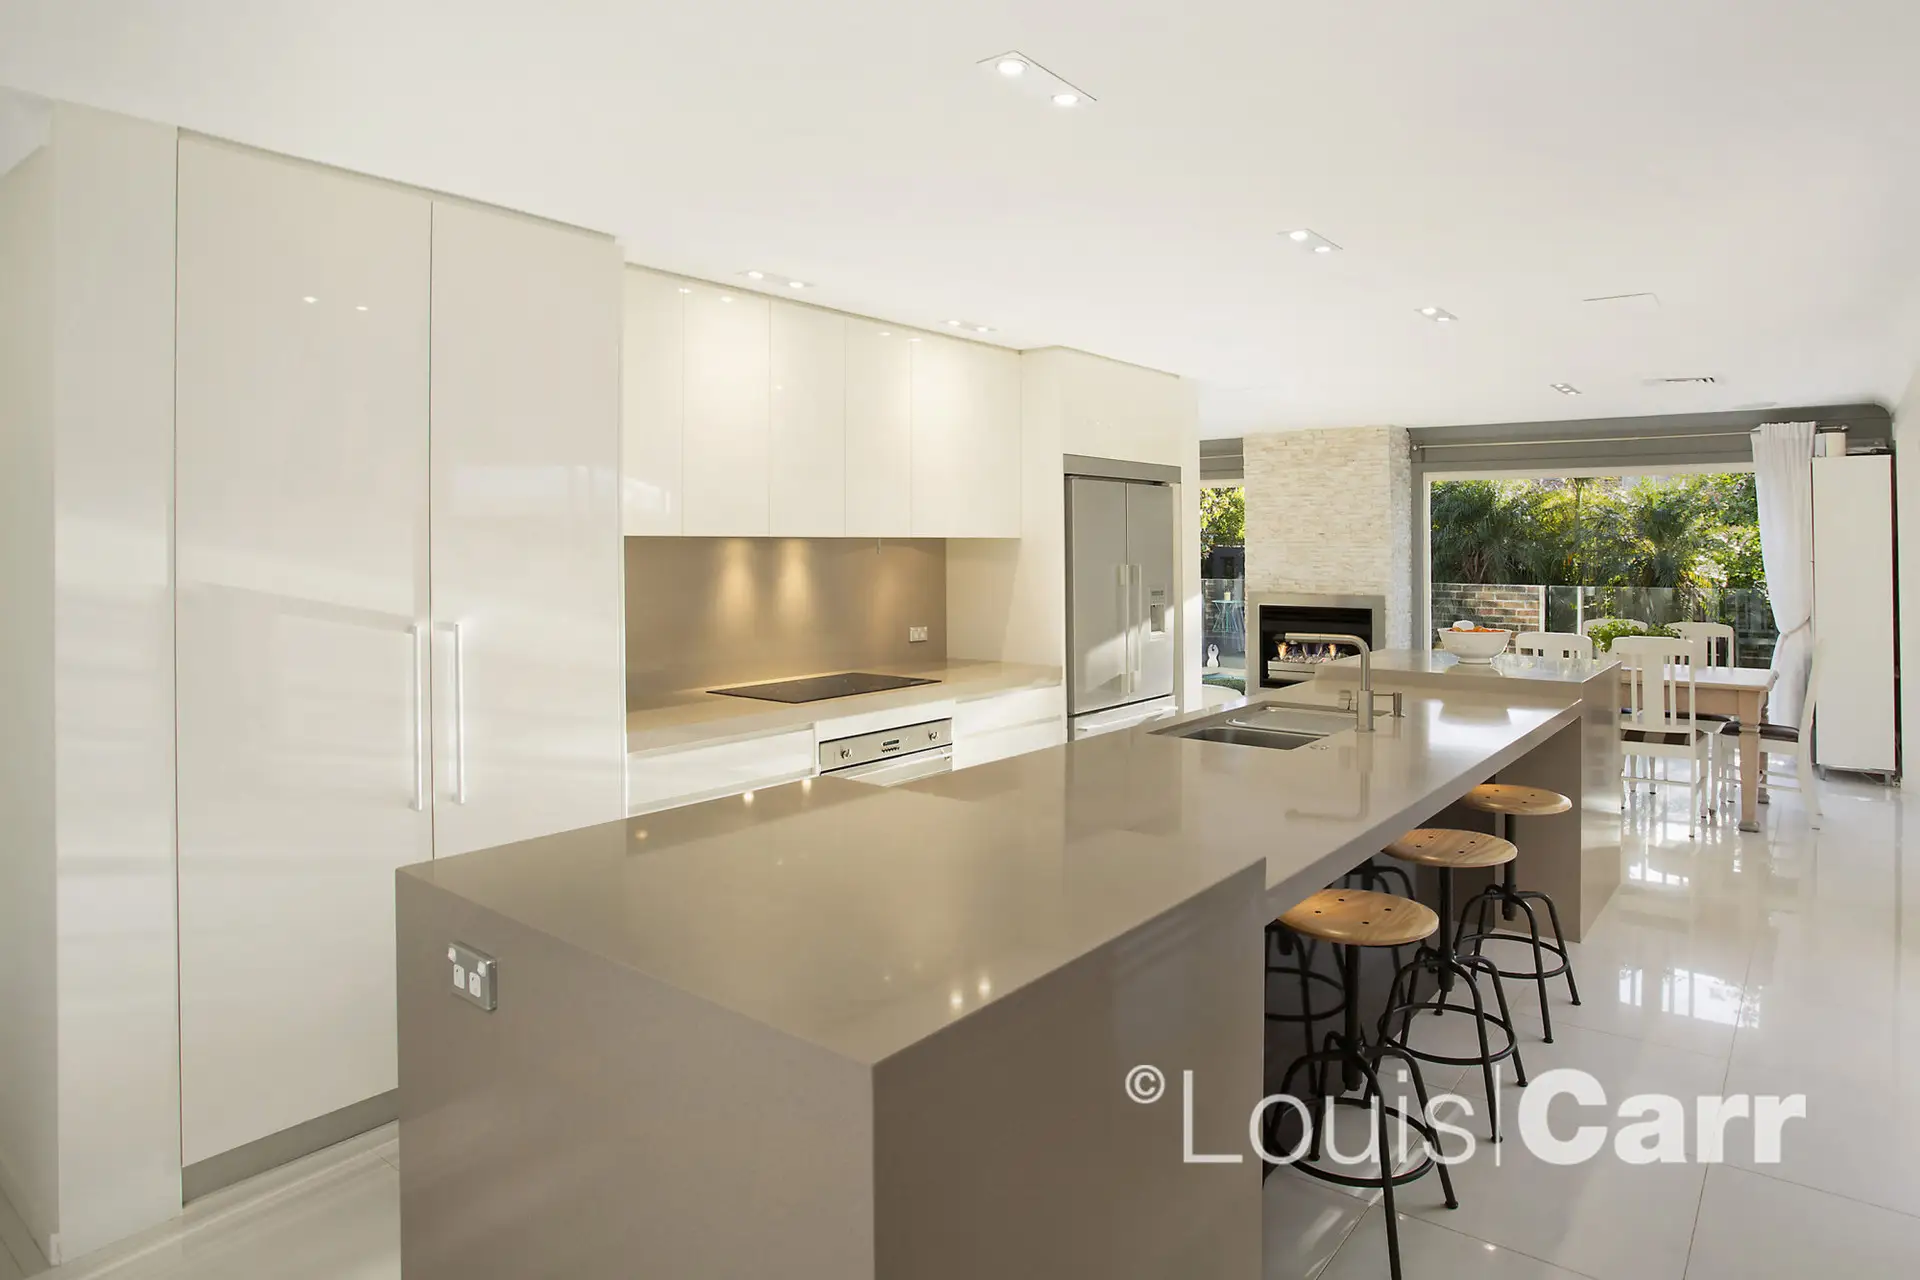 Photo #3: 9 Naomi Court, Cherrybrook - Sold by Louis Carr Real Estate